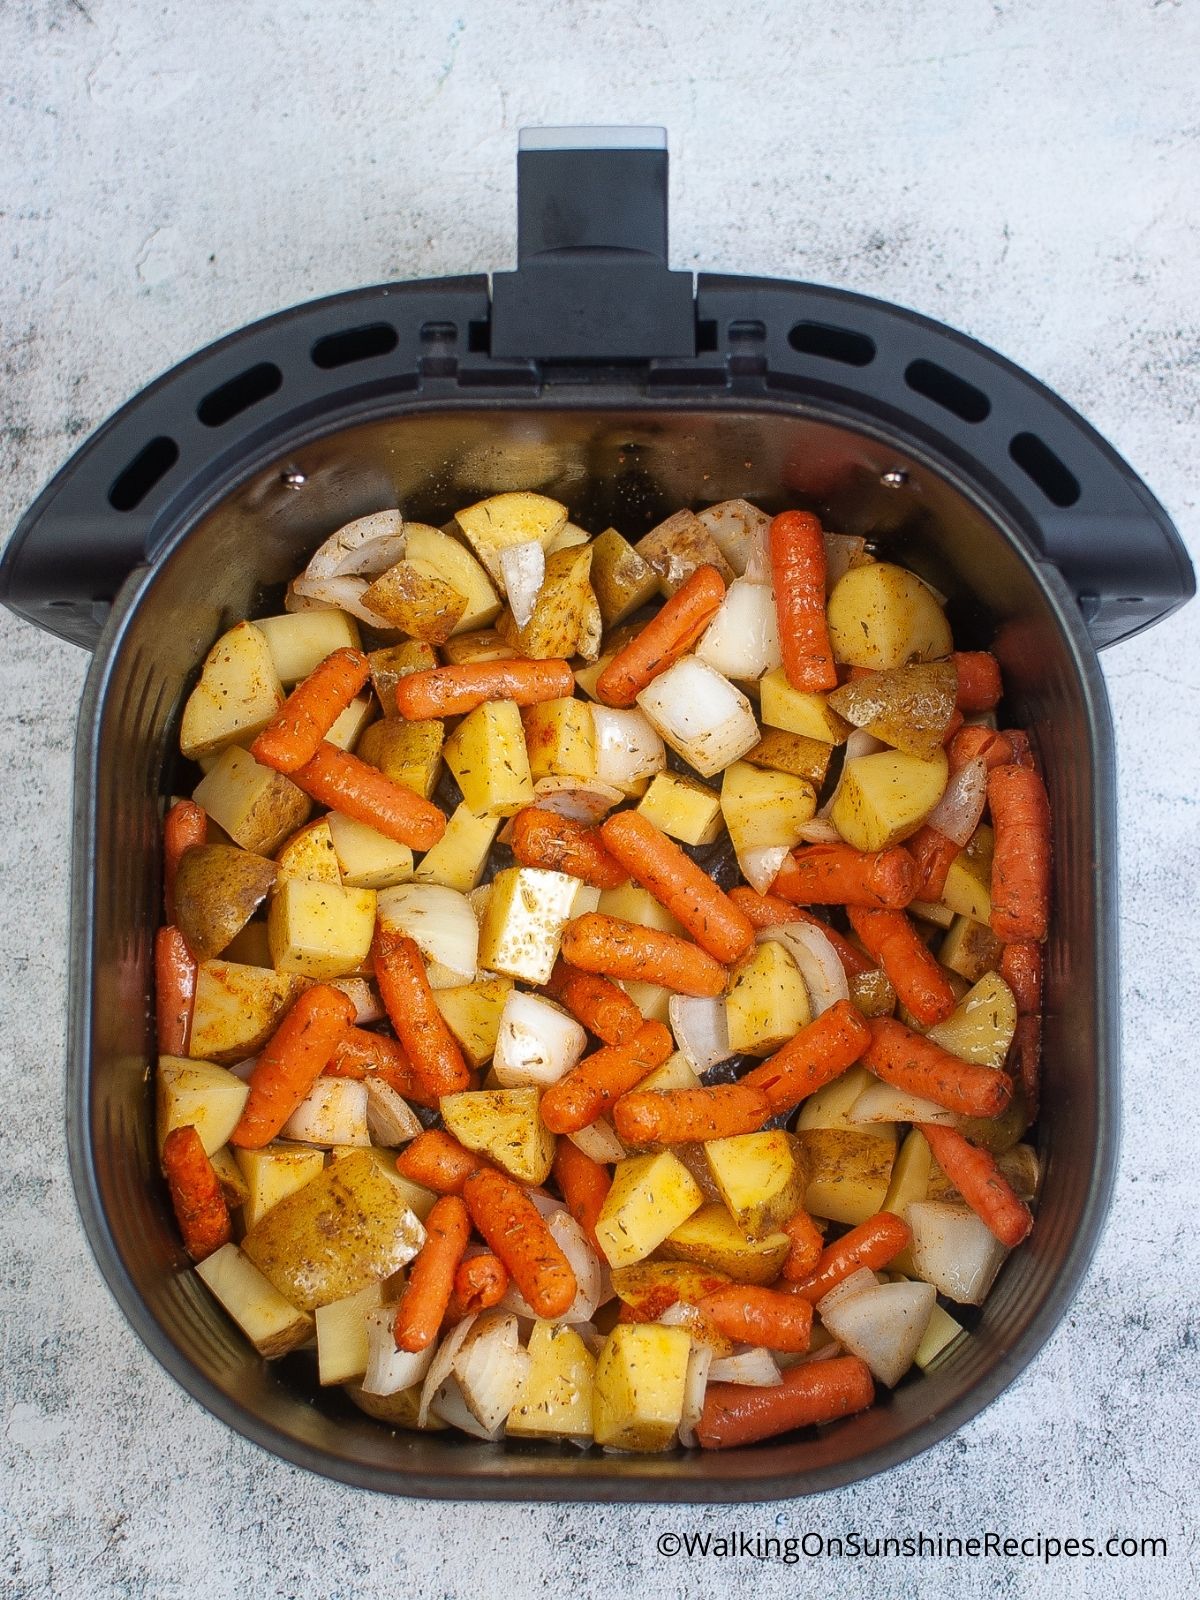 Potatoes Onions and Carrots in Air Fryer.